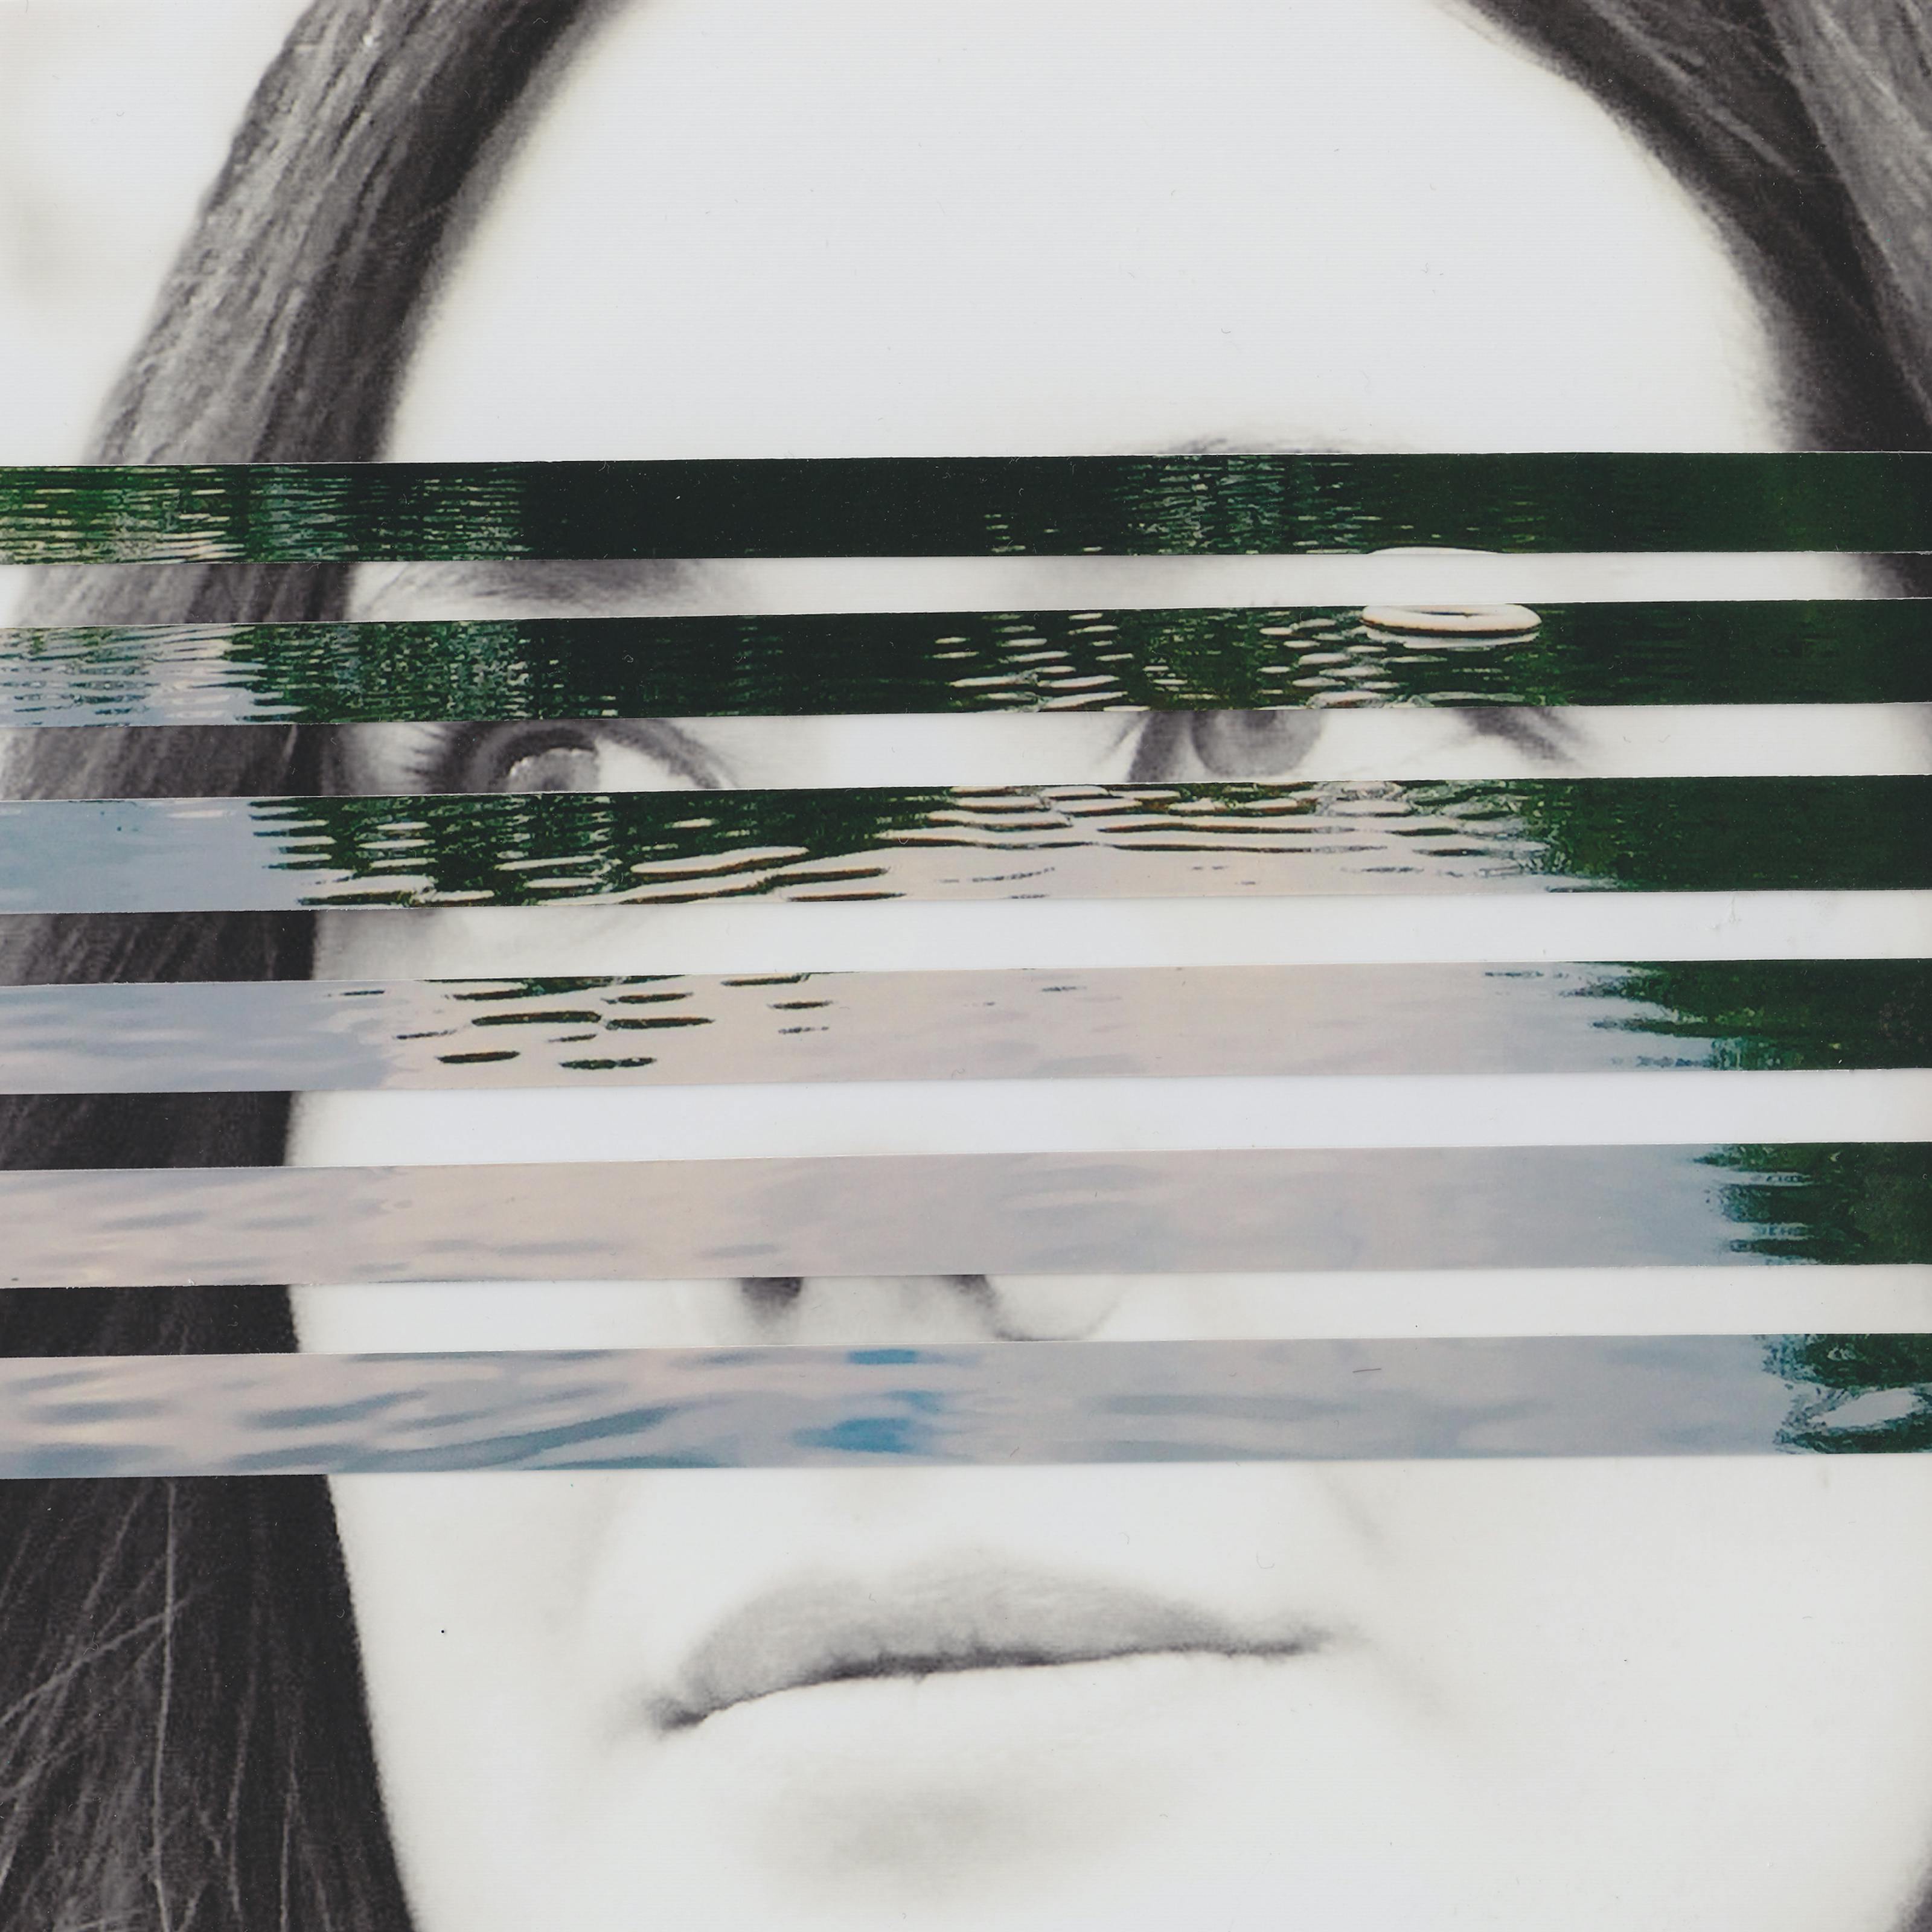 Mixed media collage artwork using a combination of two different photographic prints. The background of the collage is made up of a black and white photograph of the head of a young woman with long dark hair. She is looking off to camera left with a neutral expression on her face. Overlaid on top of her portrait, running through the centre of the image, are horizontal strips of a colour photograph showing a large expanse of open water with the ripples on the surface of the water visible through the light and dark reflections. The horizontal strips are spaced out such that the portrait beneath can be seen through the gaps.